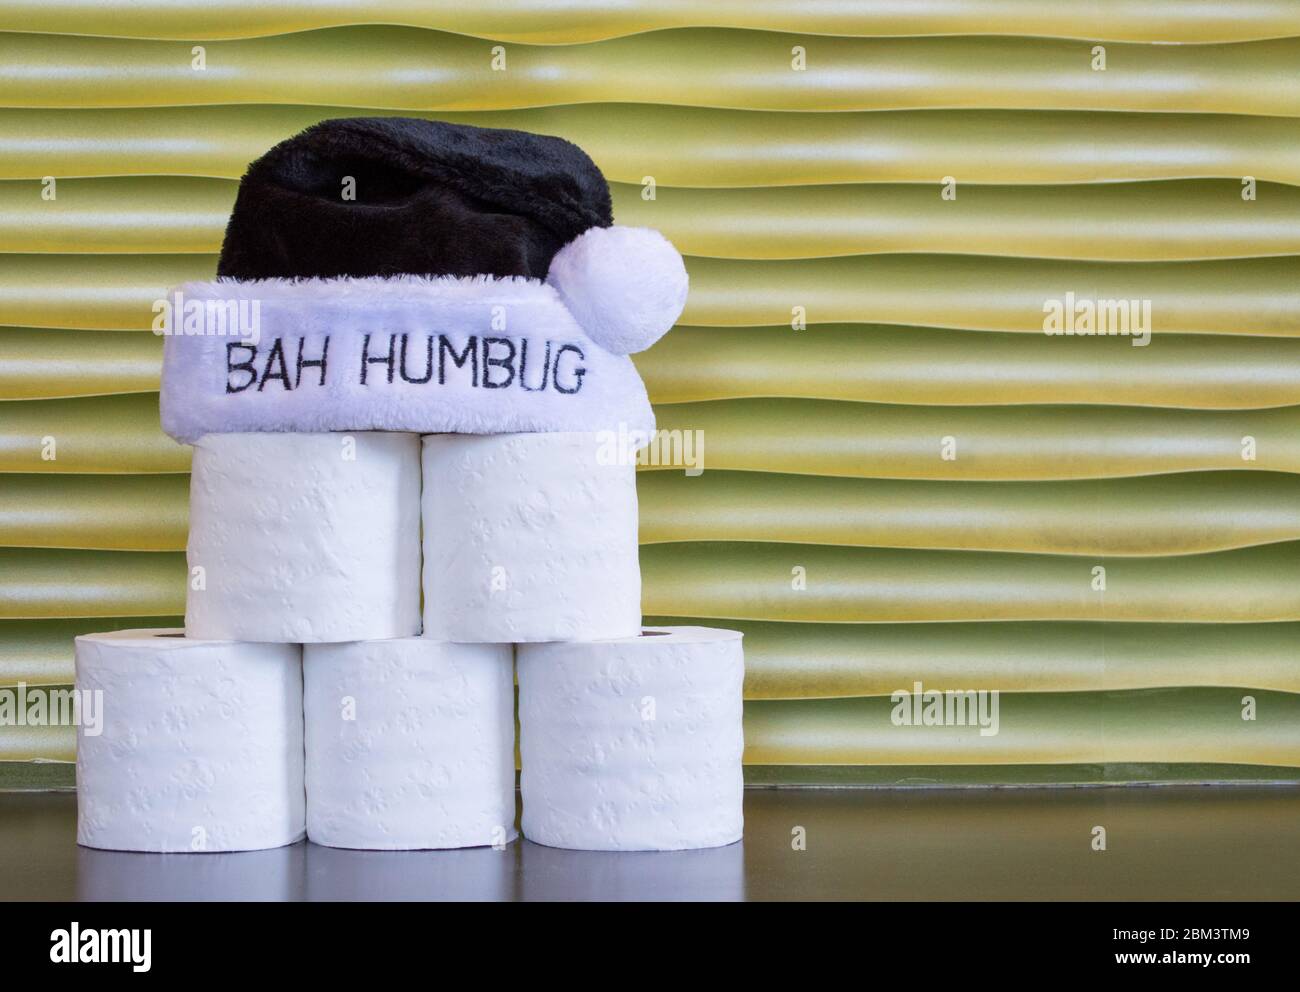 rolls of toilet paper stacked in a pyramid shape with a black and white Bah Humbug hat on top, against a gold background with copy space Stock Photo